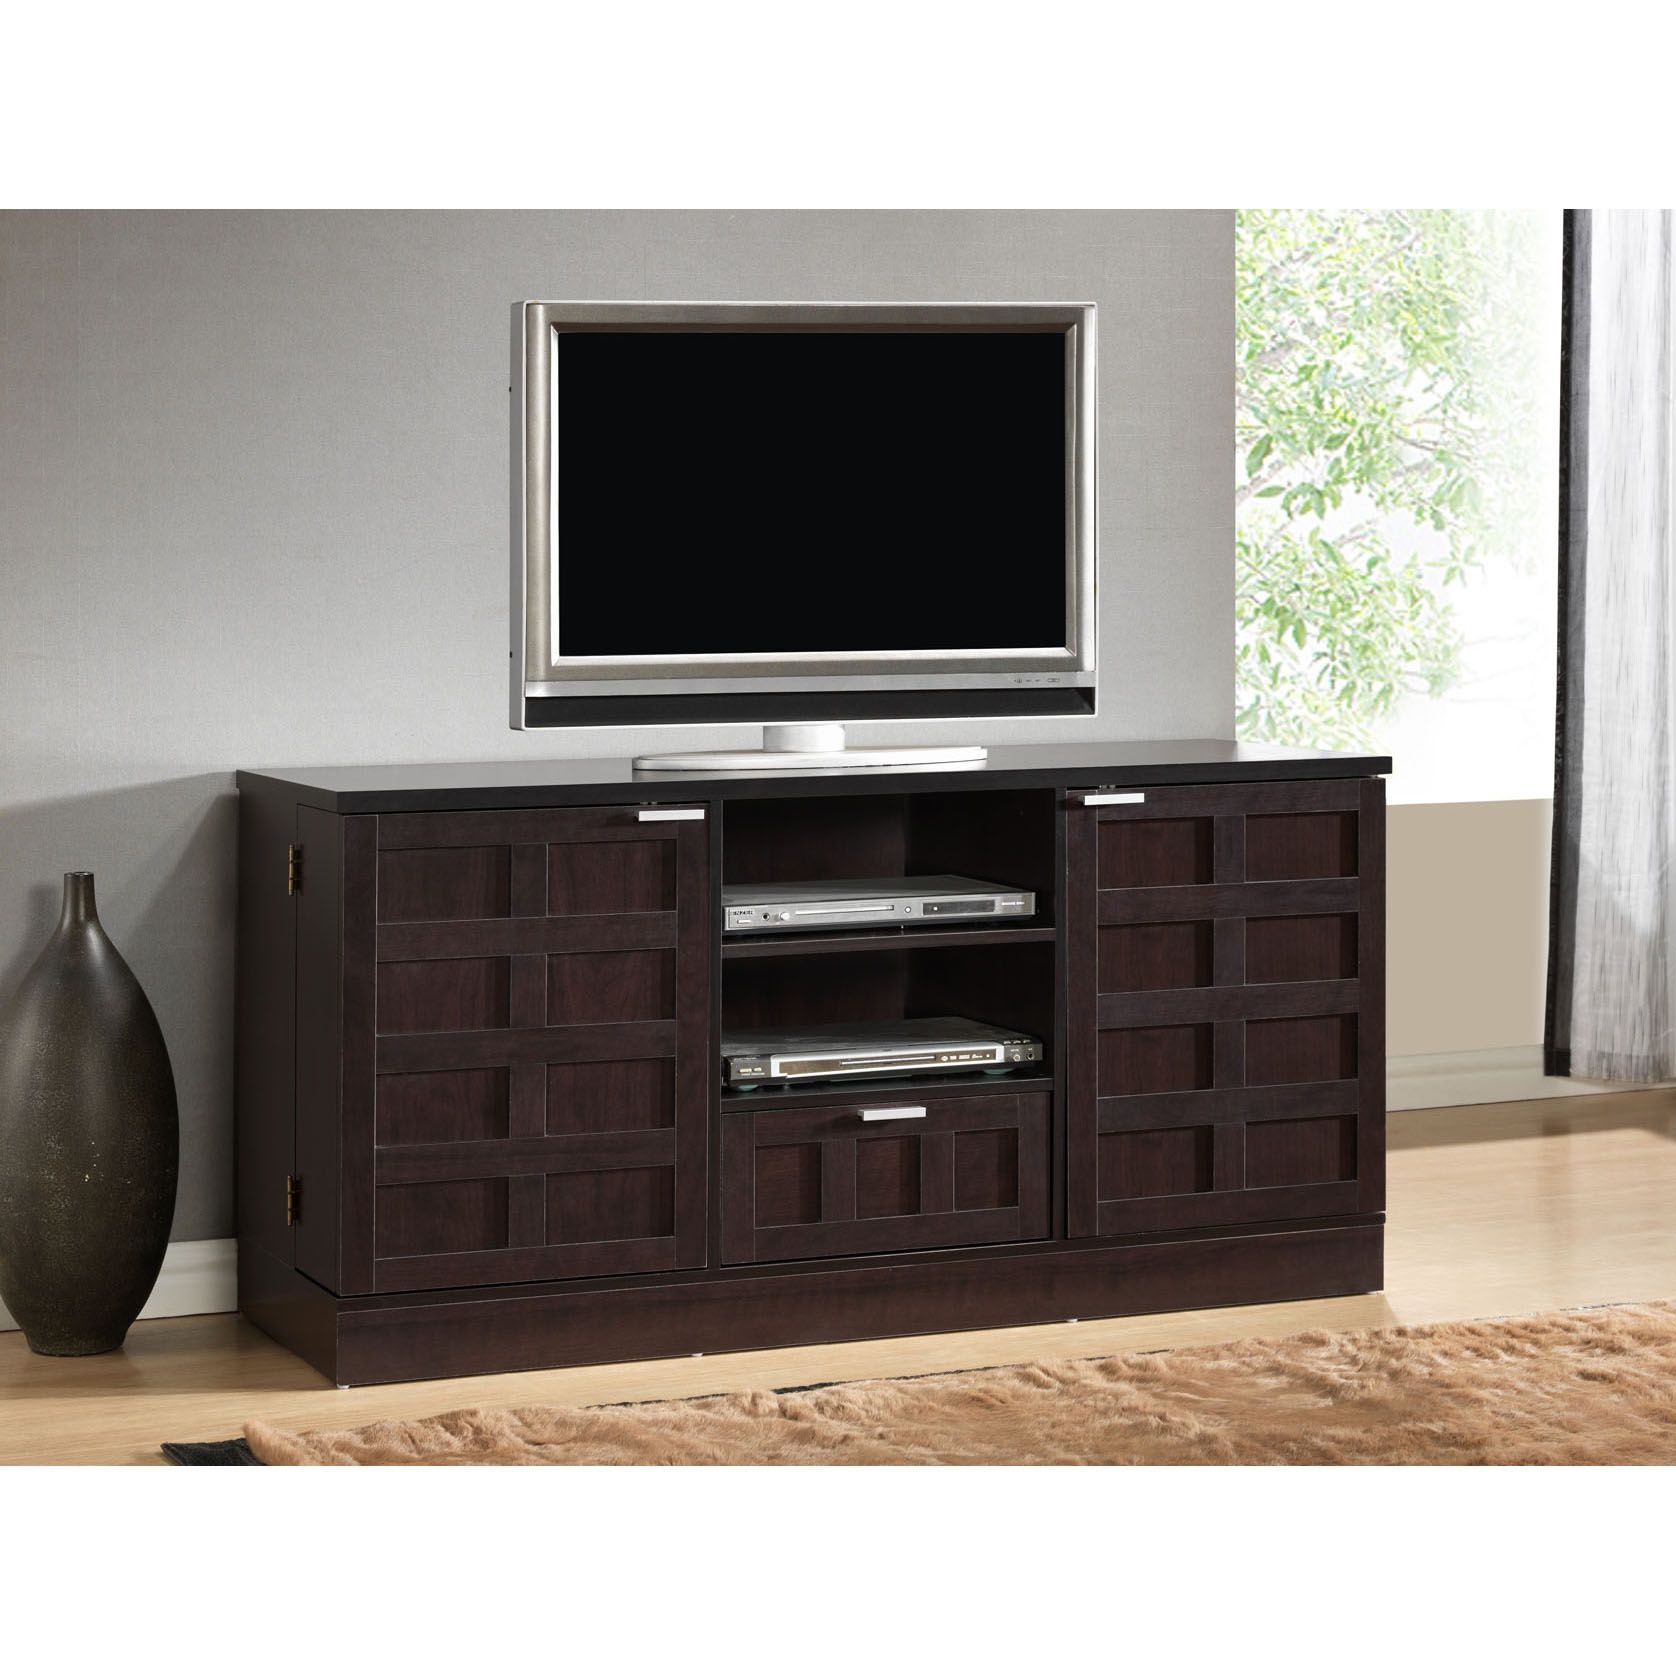 Long Media Cabinet For Your Living Room – Homesfeed Intended For Long Tv Stands Furniture (View 5 of 15)